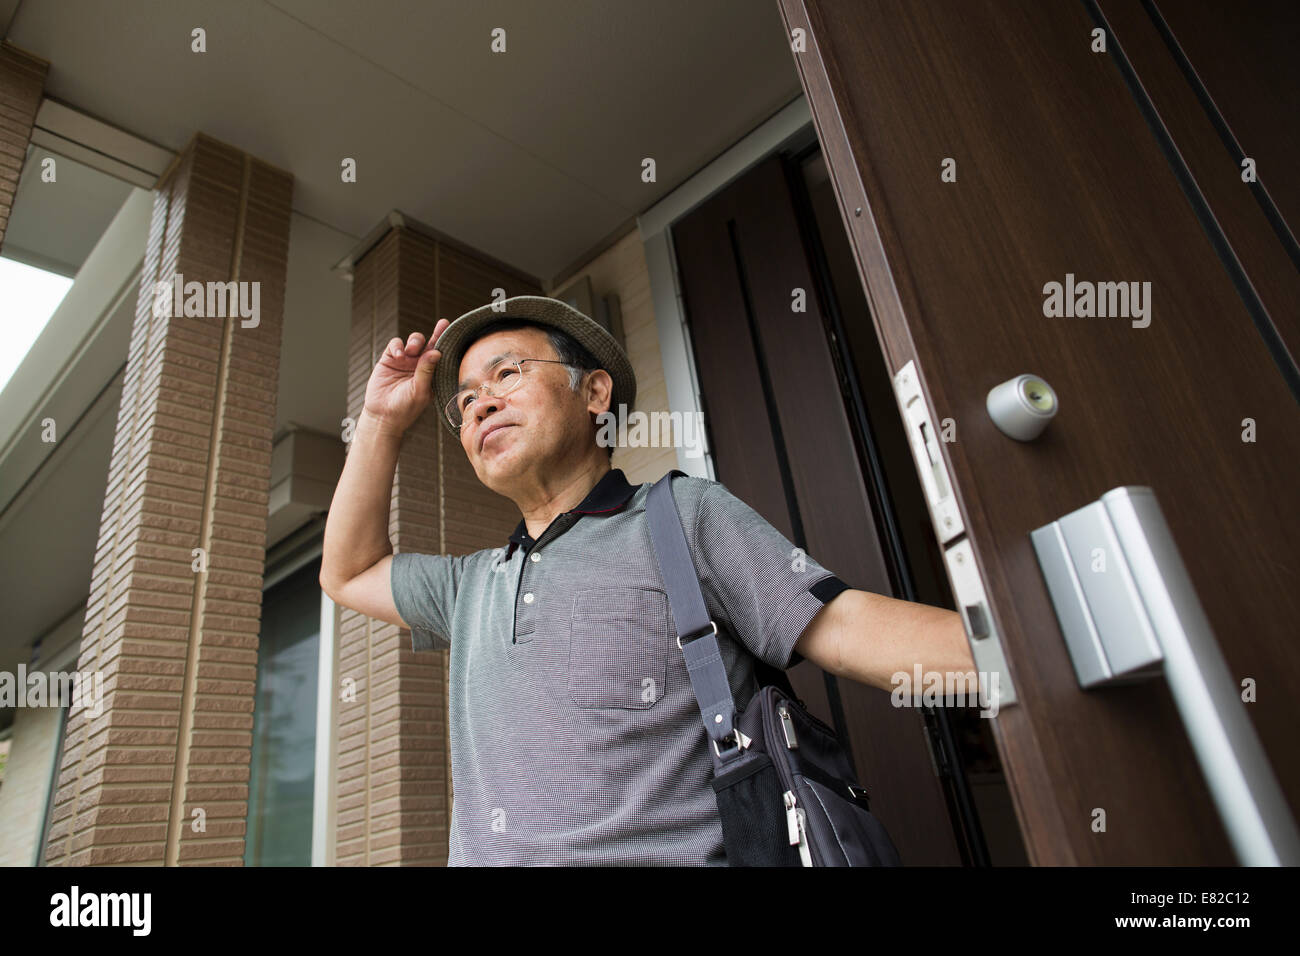 A man standing at his front door. Stock Photo